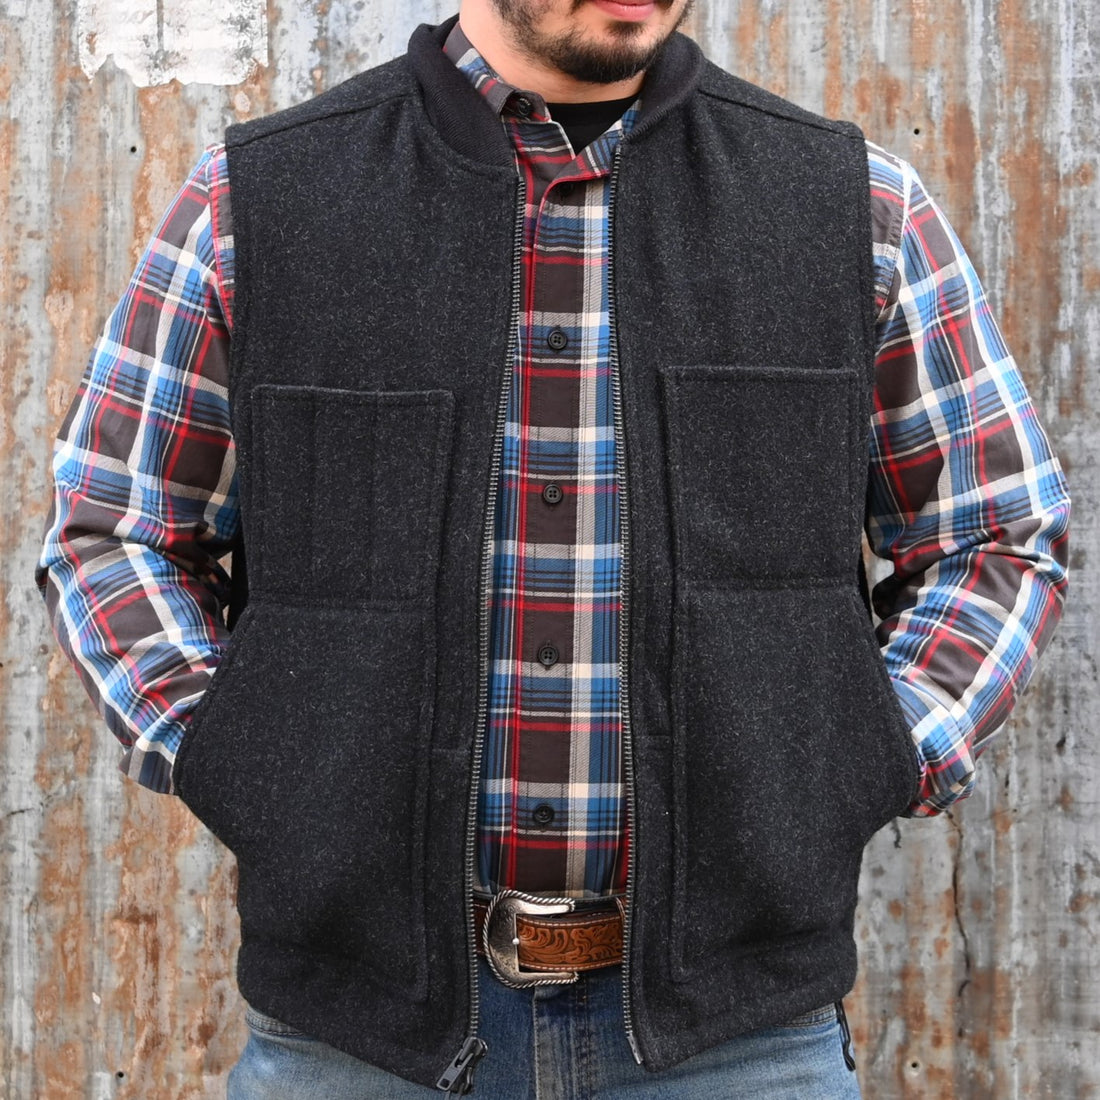 Filson Lined Mackinaw Wool Work Vest view of vest in charcol